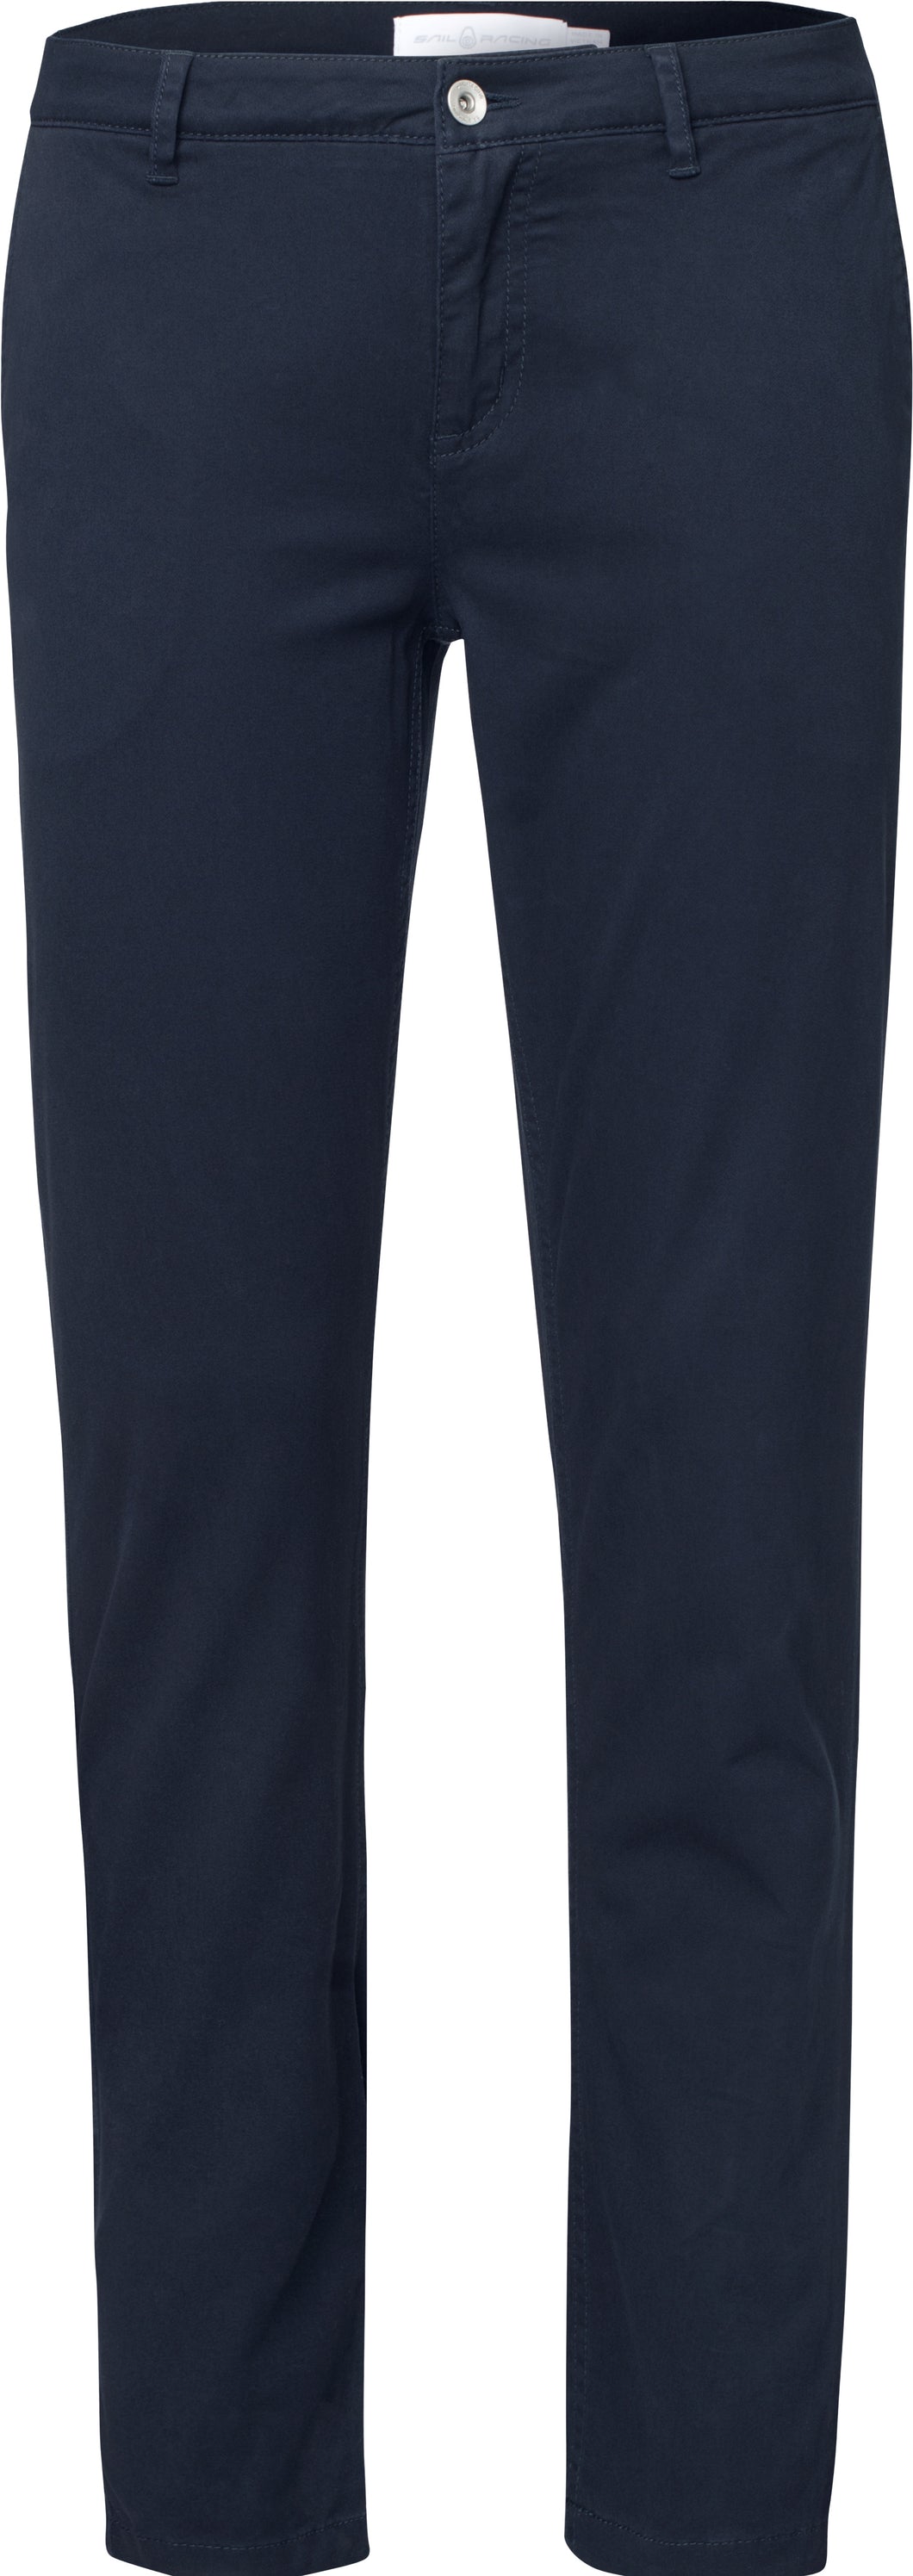 SAIL RACING WOMEN'S GALE CHINO - NAVY - DISCONTINUED STYLE - SIZE 27 ONLY